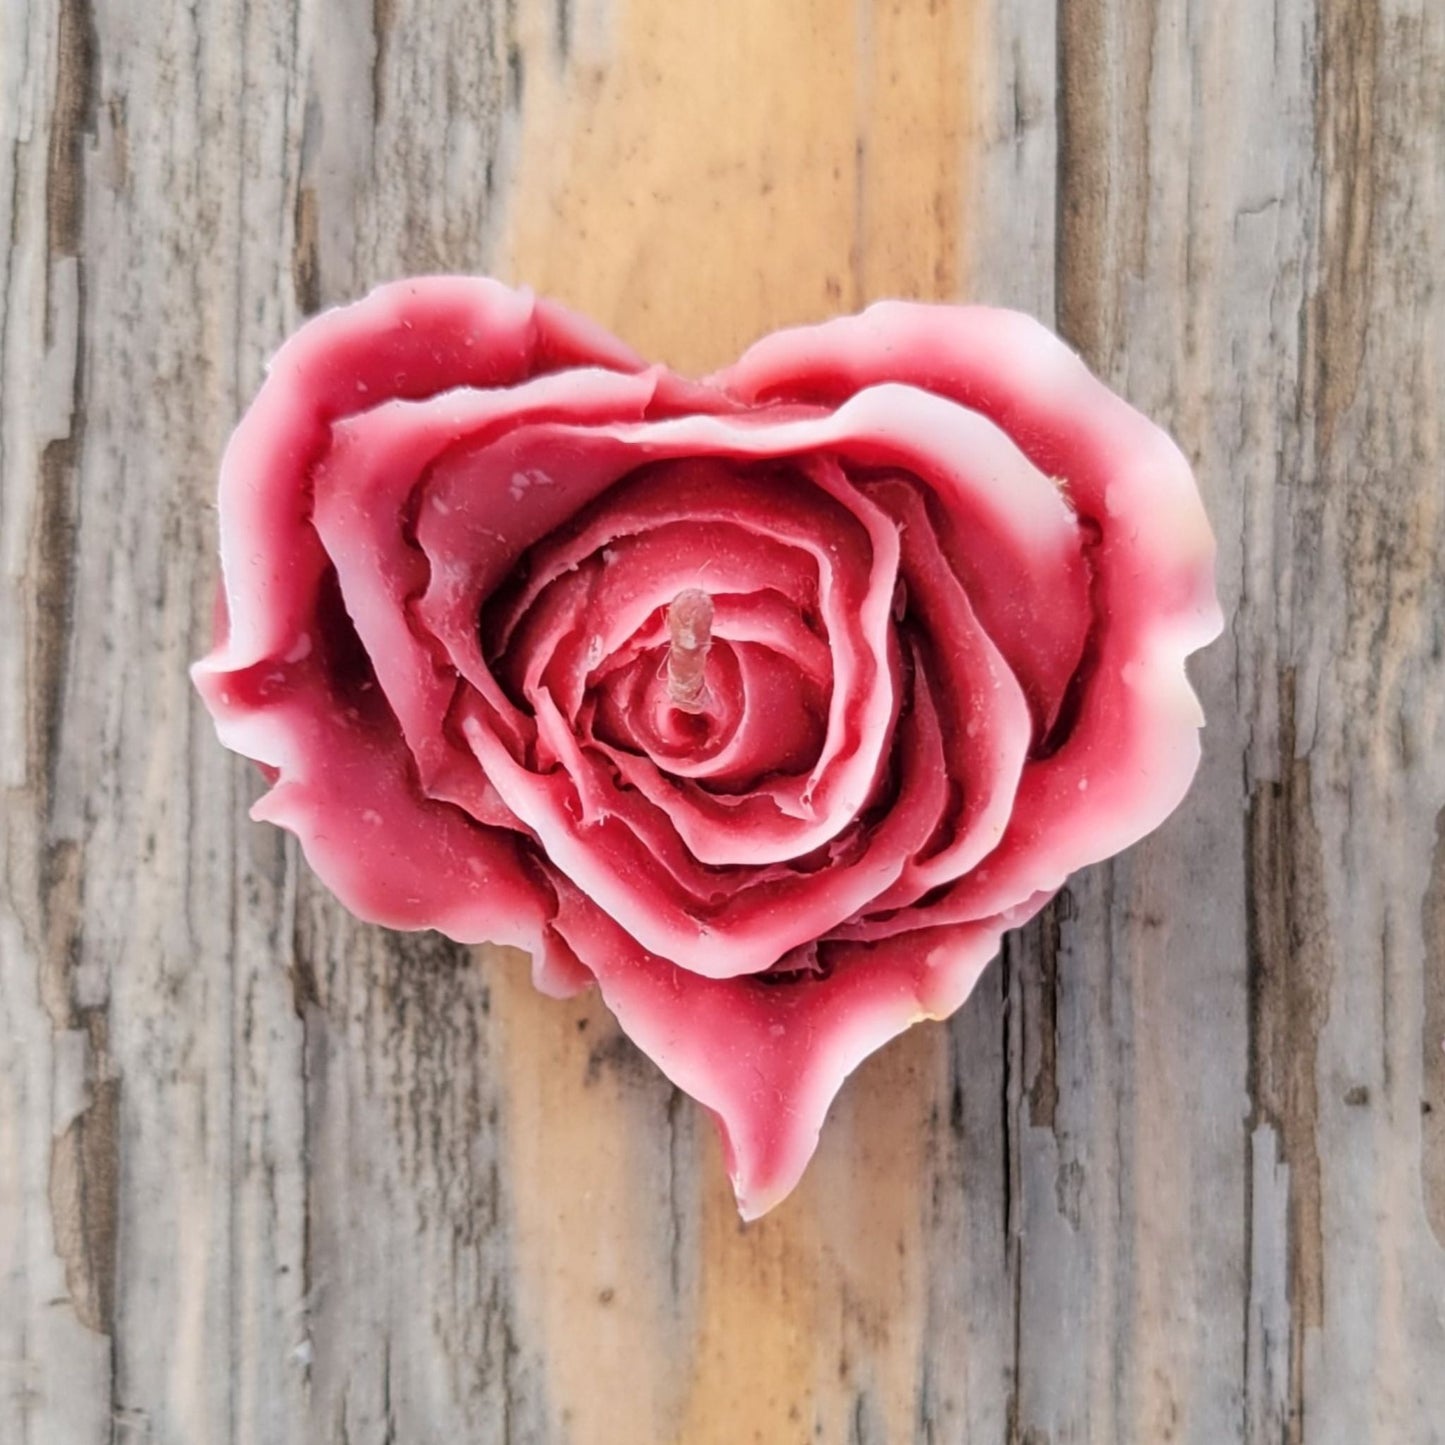 A handmade heart shaped flower votive candle in dark red with white edges.